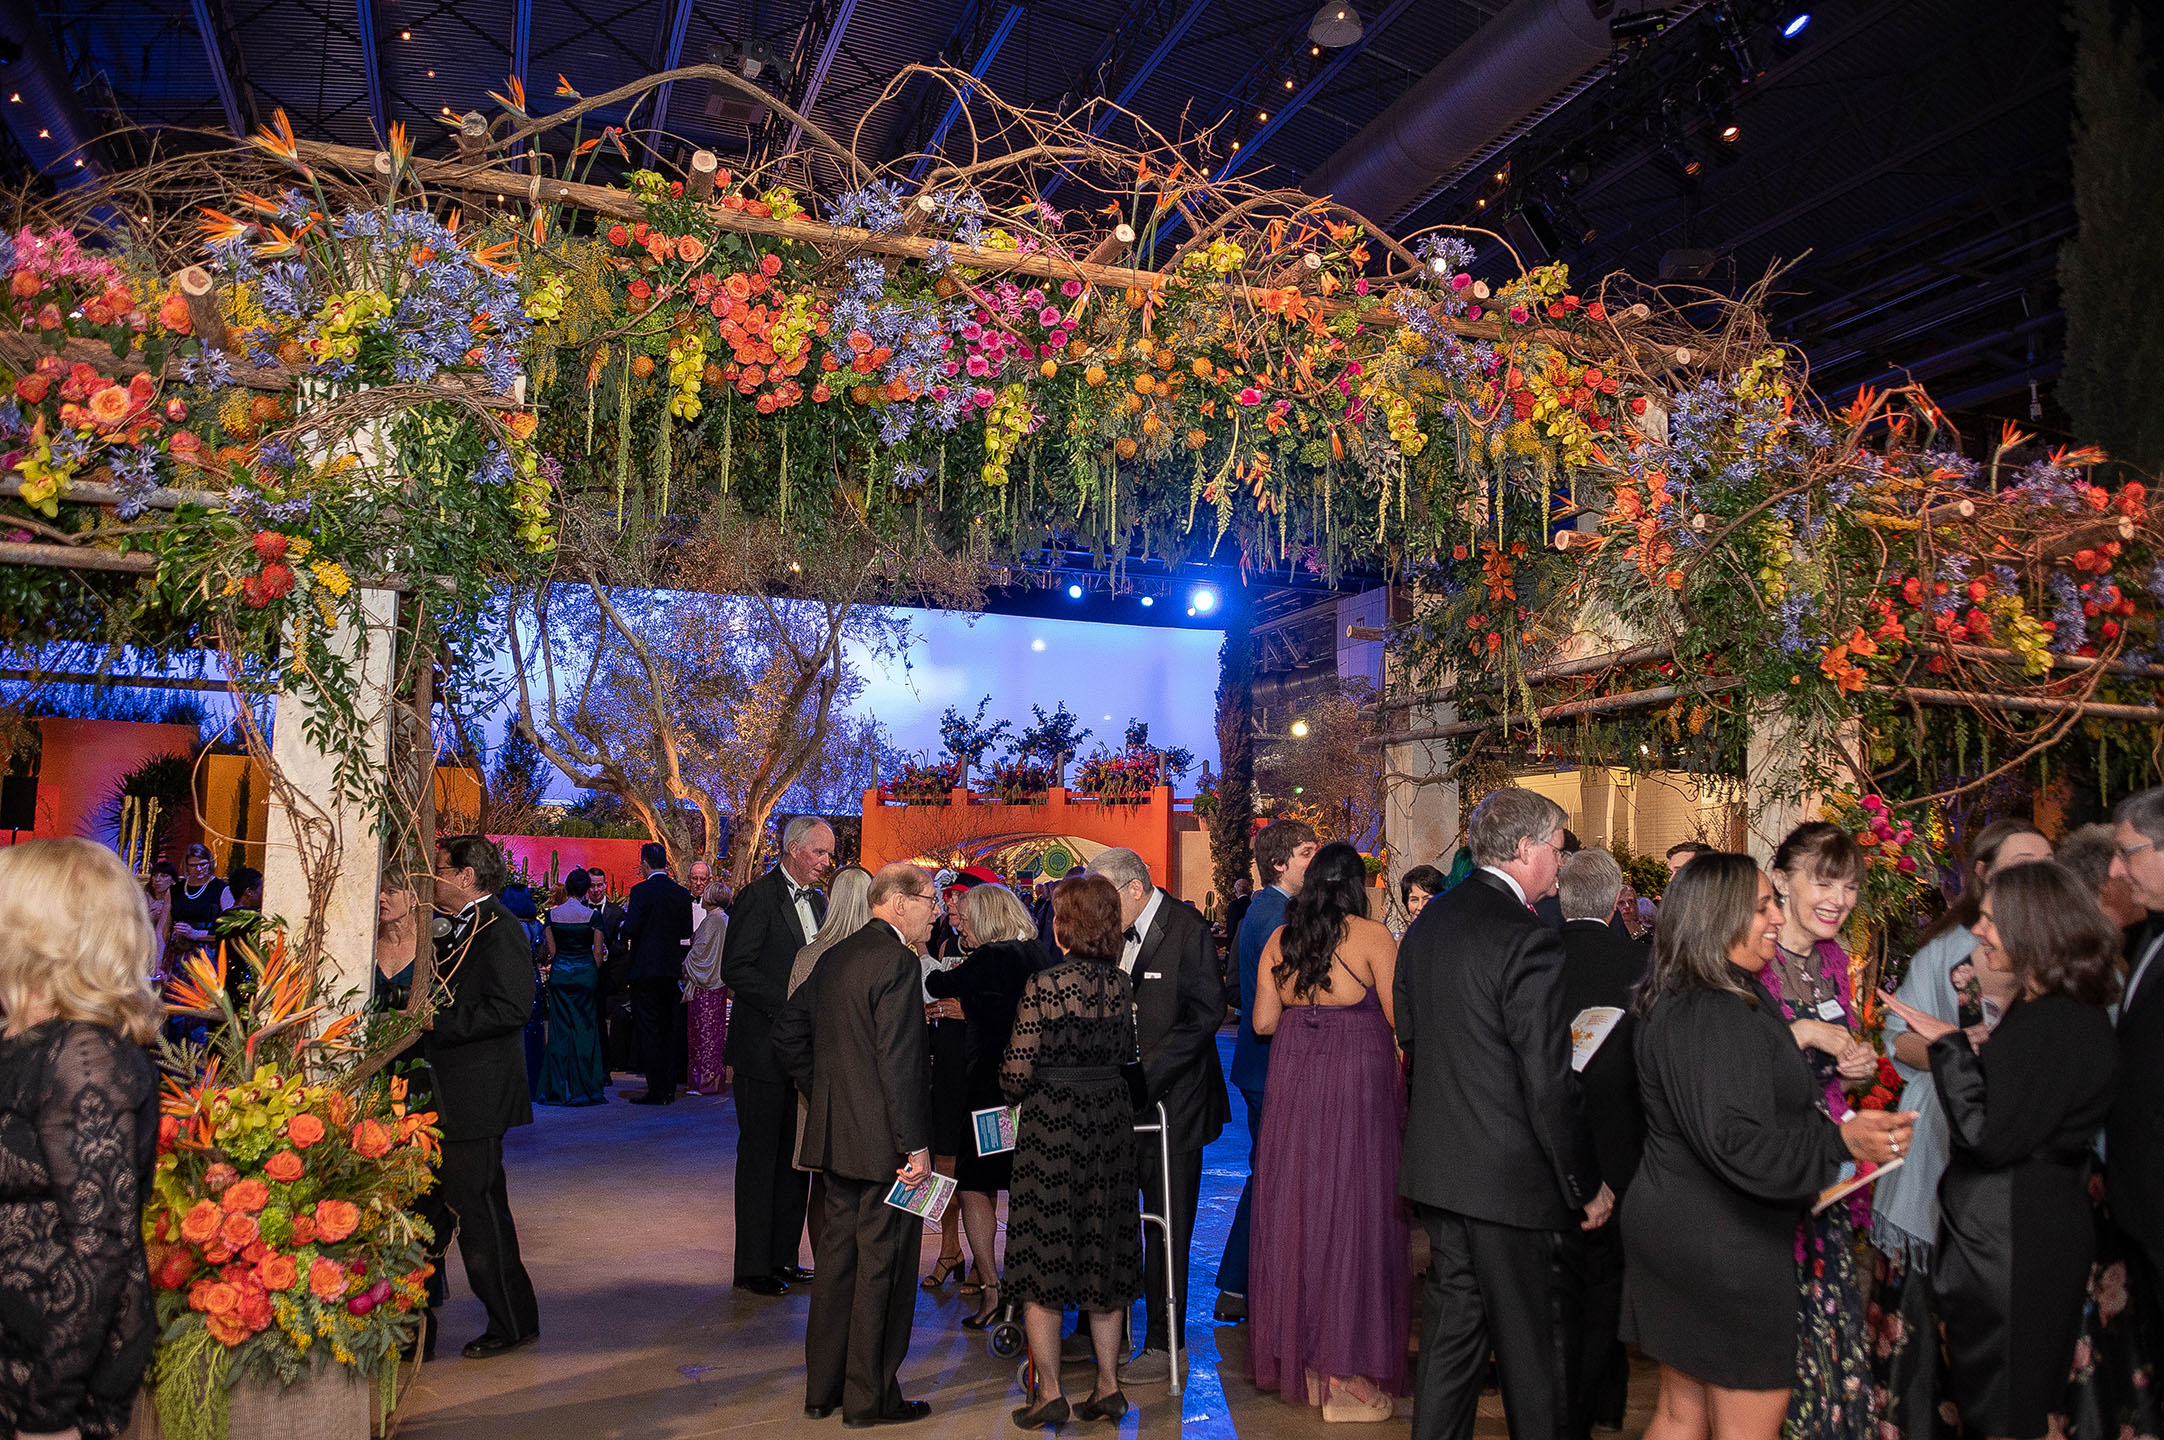 The 2020 Philadelphia Flower Show Preview Party took place at the Pennsylvania Convention Center February 28. (Photos: Peter Fitzpatrick/ AL DIA News